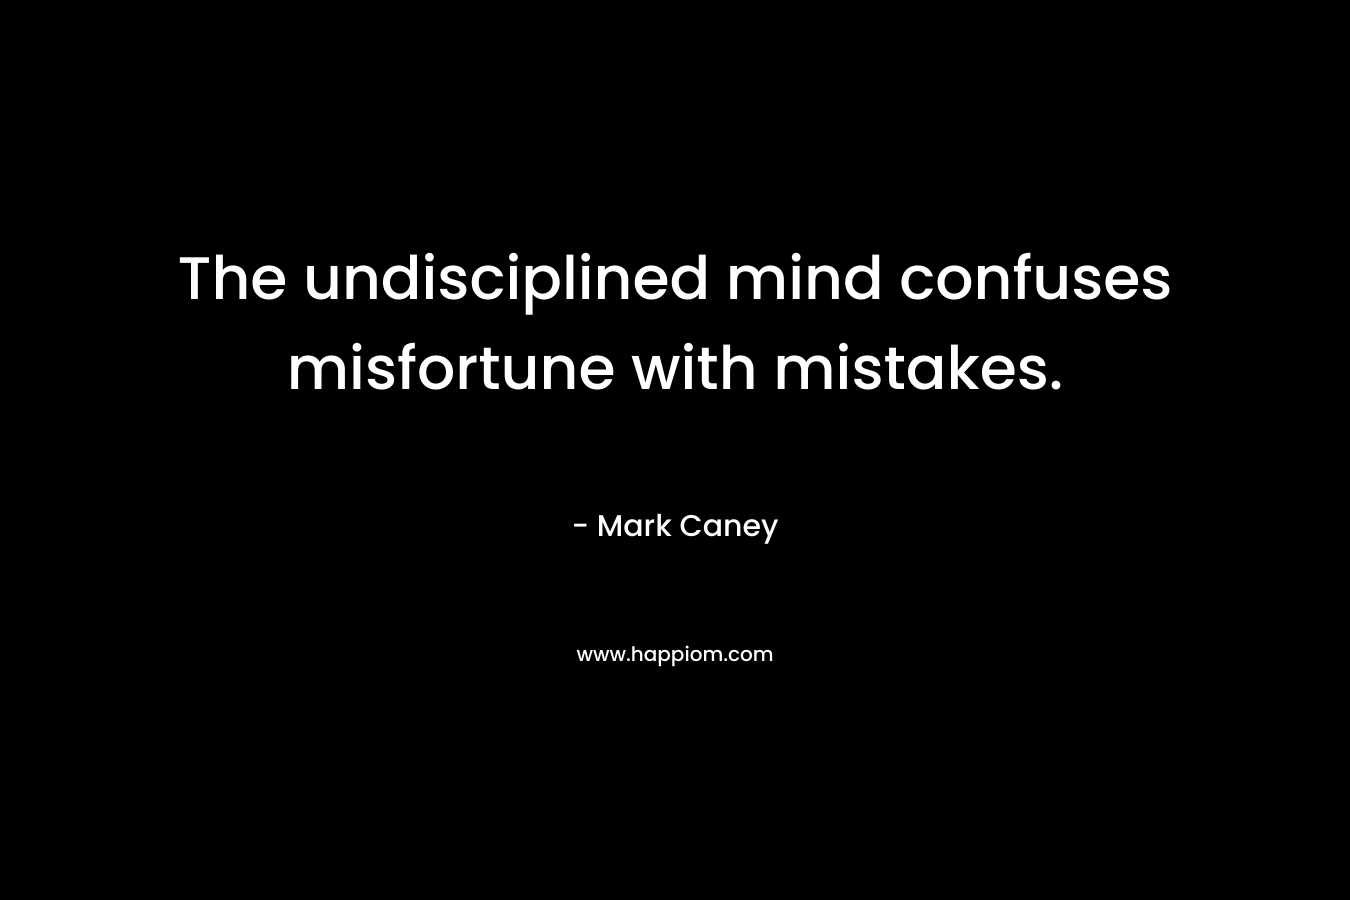 The undisciplined mind confuses misfortune with mistakes. – Mark Caney